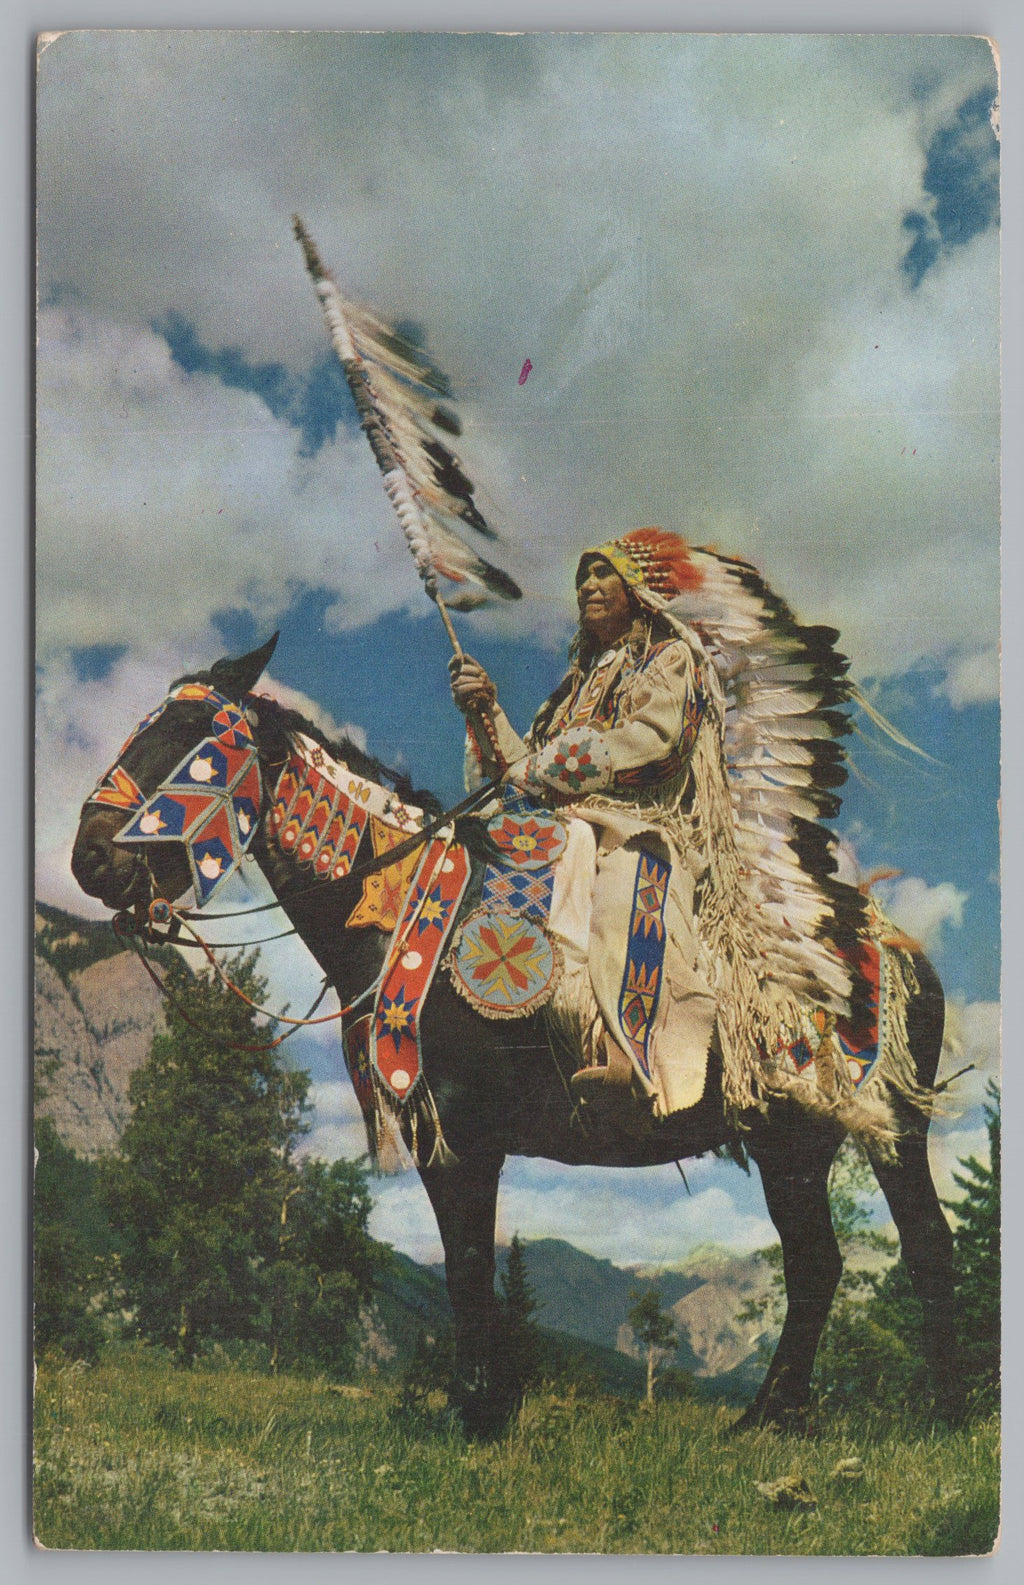 Indian Chief, Horse Mounted, Oklahoma, USA, Vintage Post Card.